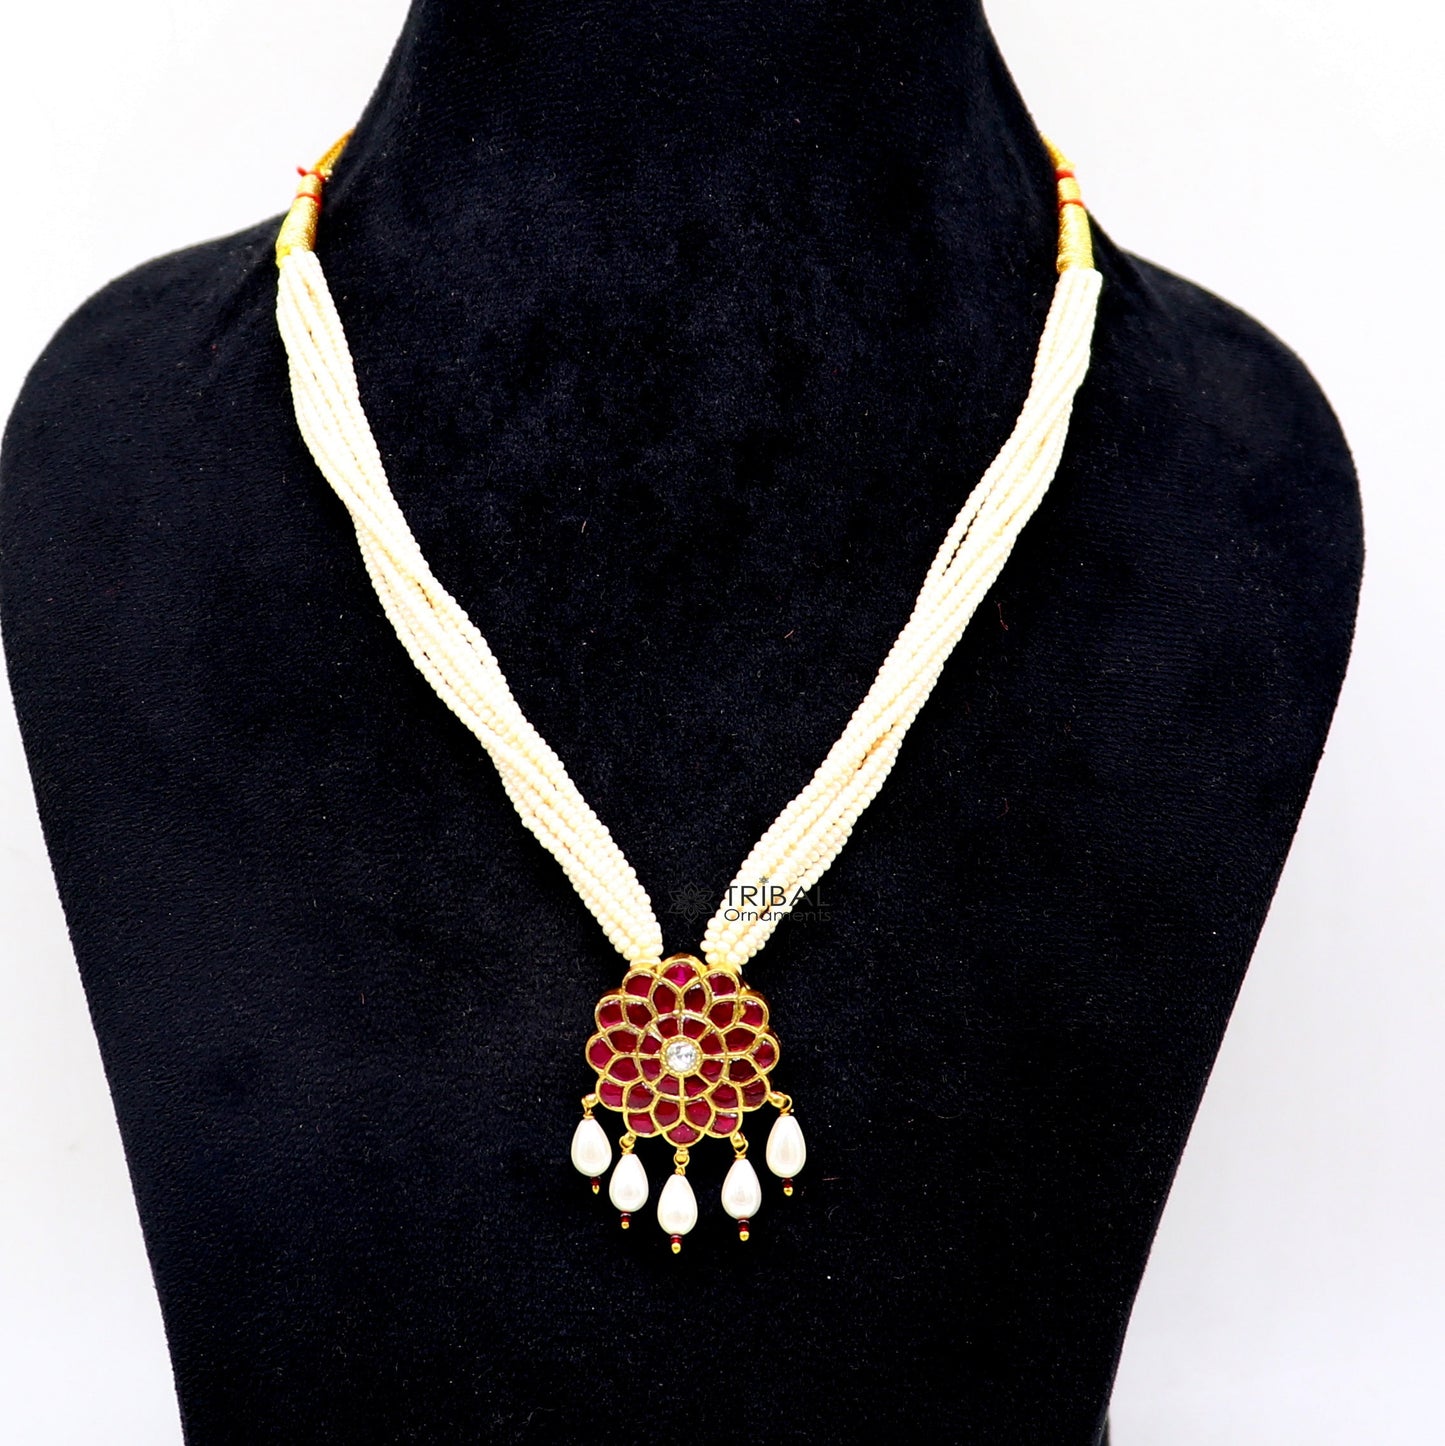 92.5 sterling silver Fabulous charming kundan work red stone flower pendant trendy necklace with multiline pearls strings jewellery set617 - TRIBAL ORNAMENTS